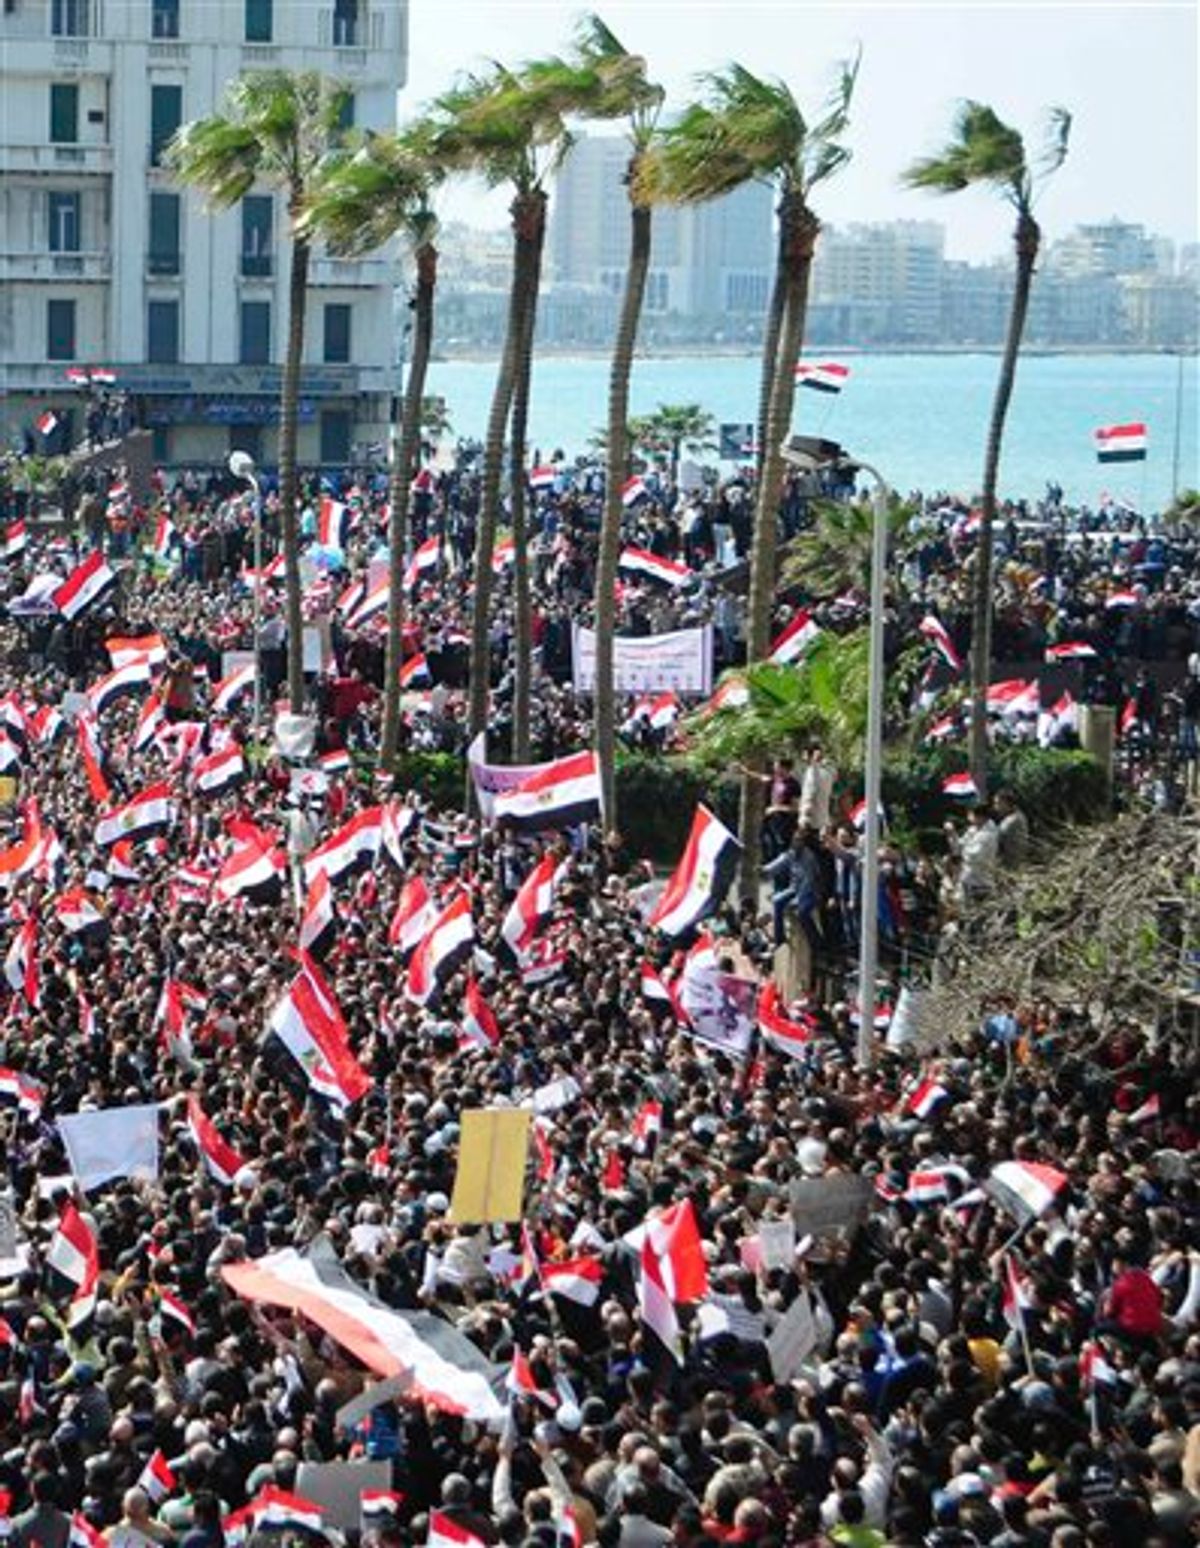 Thousands of Egyptian anti-government protesters march Alexandria, Egypt, Friday, Feb. 11, 2011. Egypt's military threw its weight Friday behind President Hosni Mubarak's plan to stay in office through September elections while protesters fanned out to the presidential palace in Cairo and other key symbols of the authoritarian regime in a new push to force the leader to step down immediately. The statement by the Armed Forces Supreme Council - its second in two days - was a blow to many protesters who had called on the military to take action to push out Mubarak after his latest refusal to step down. (AP Photo/ Tarek Fawzy) (AP)